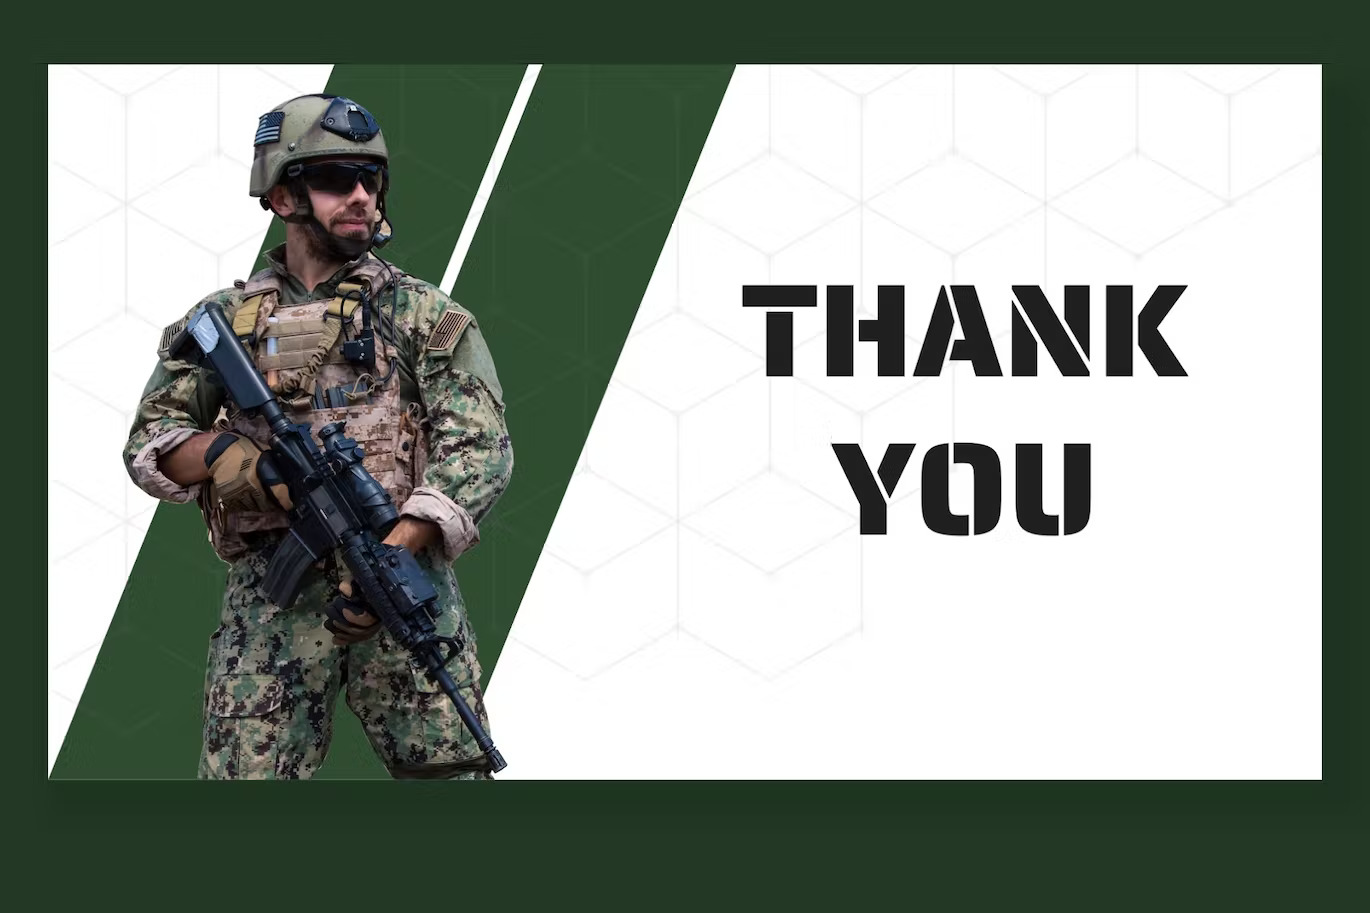 Black lettering "Thank you" and image military on a dark green and white background.